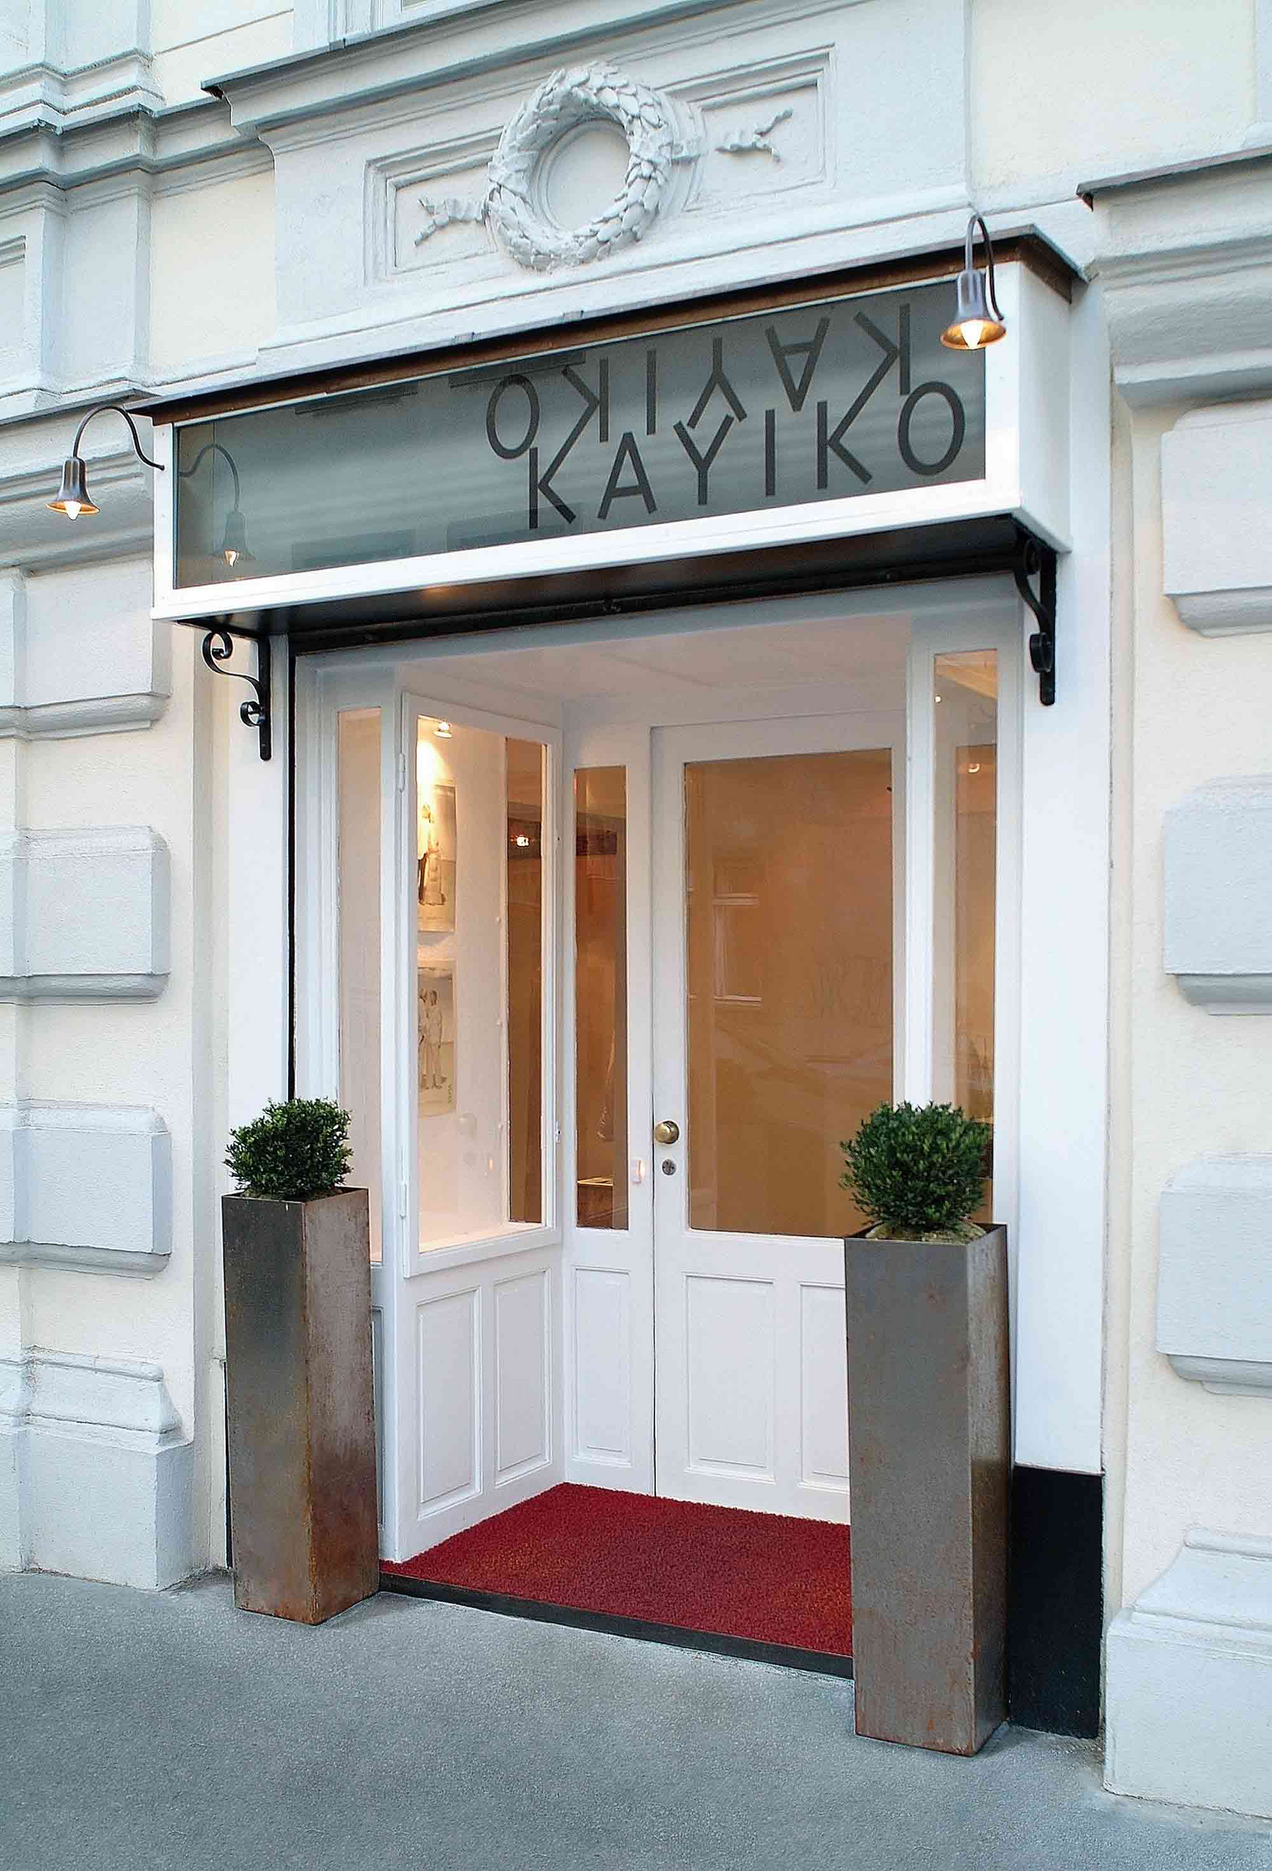 White facade of fashion store Kayiko Vienna, above the lintel you can see the sign KAYIKO